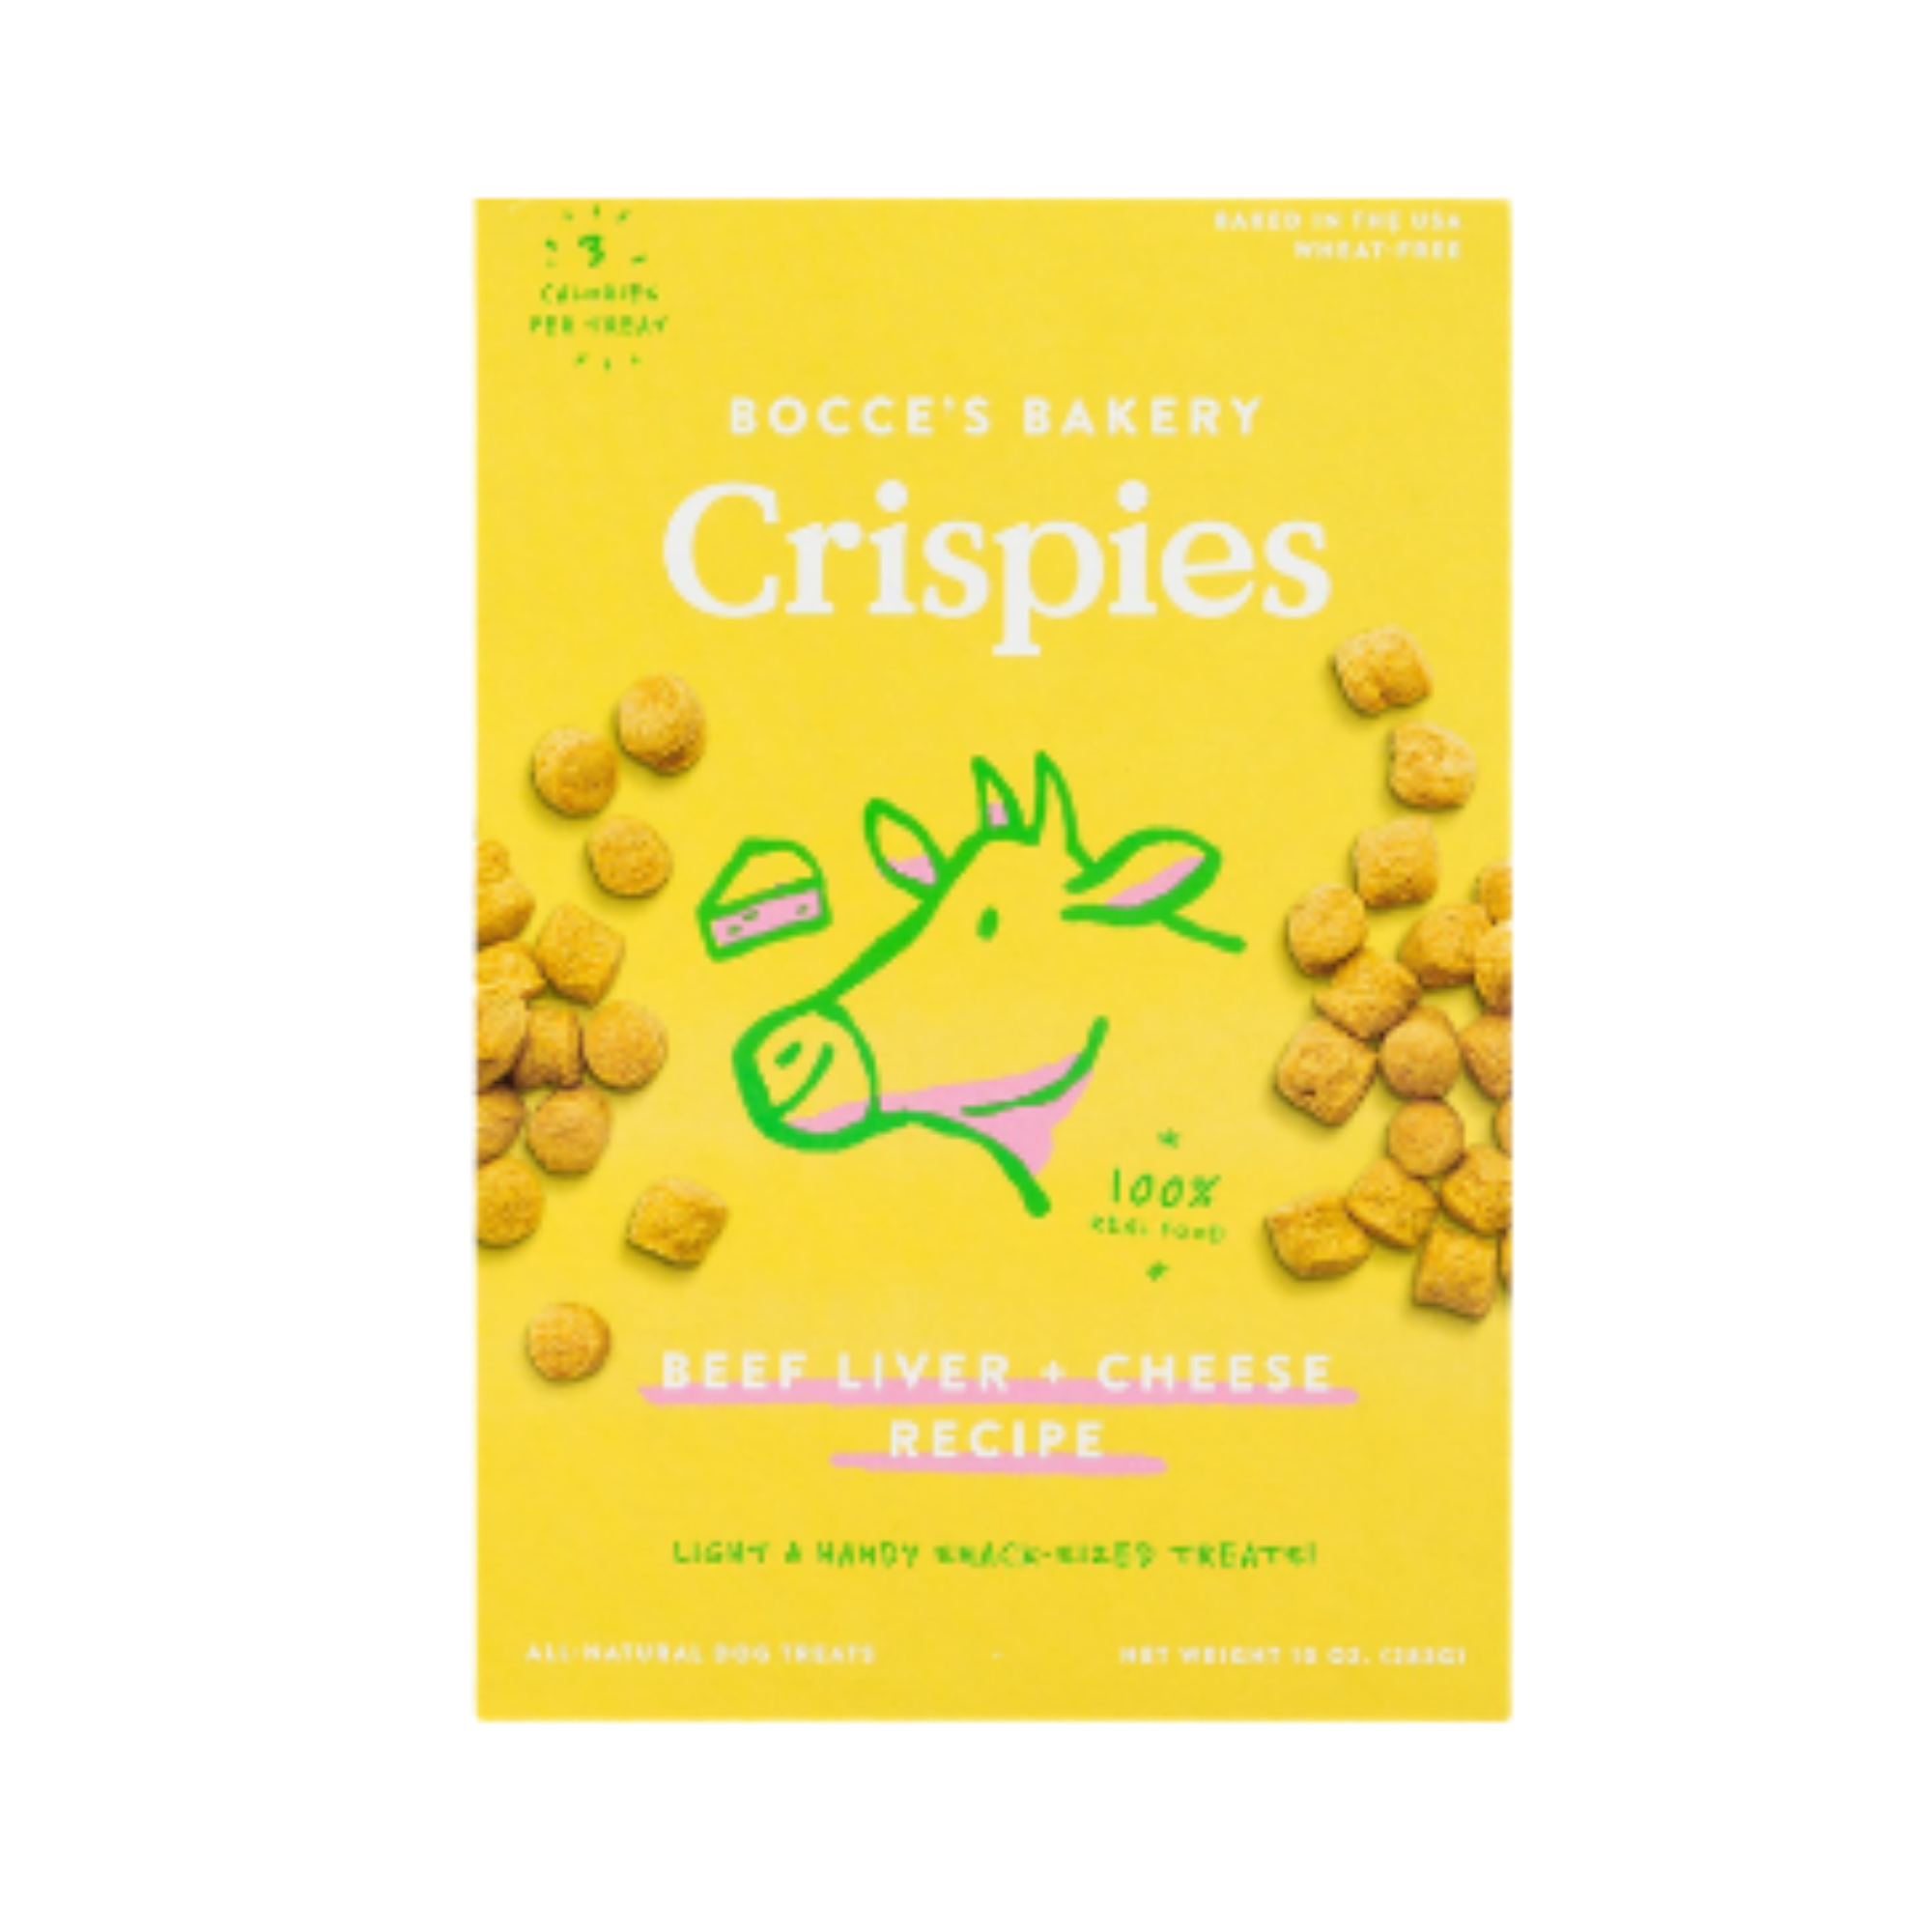 Bocce's Bakery Beef Liver + Cheese Crispies Dog Treats 10 oz - Mutts & Co.